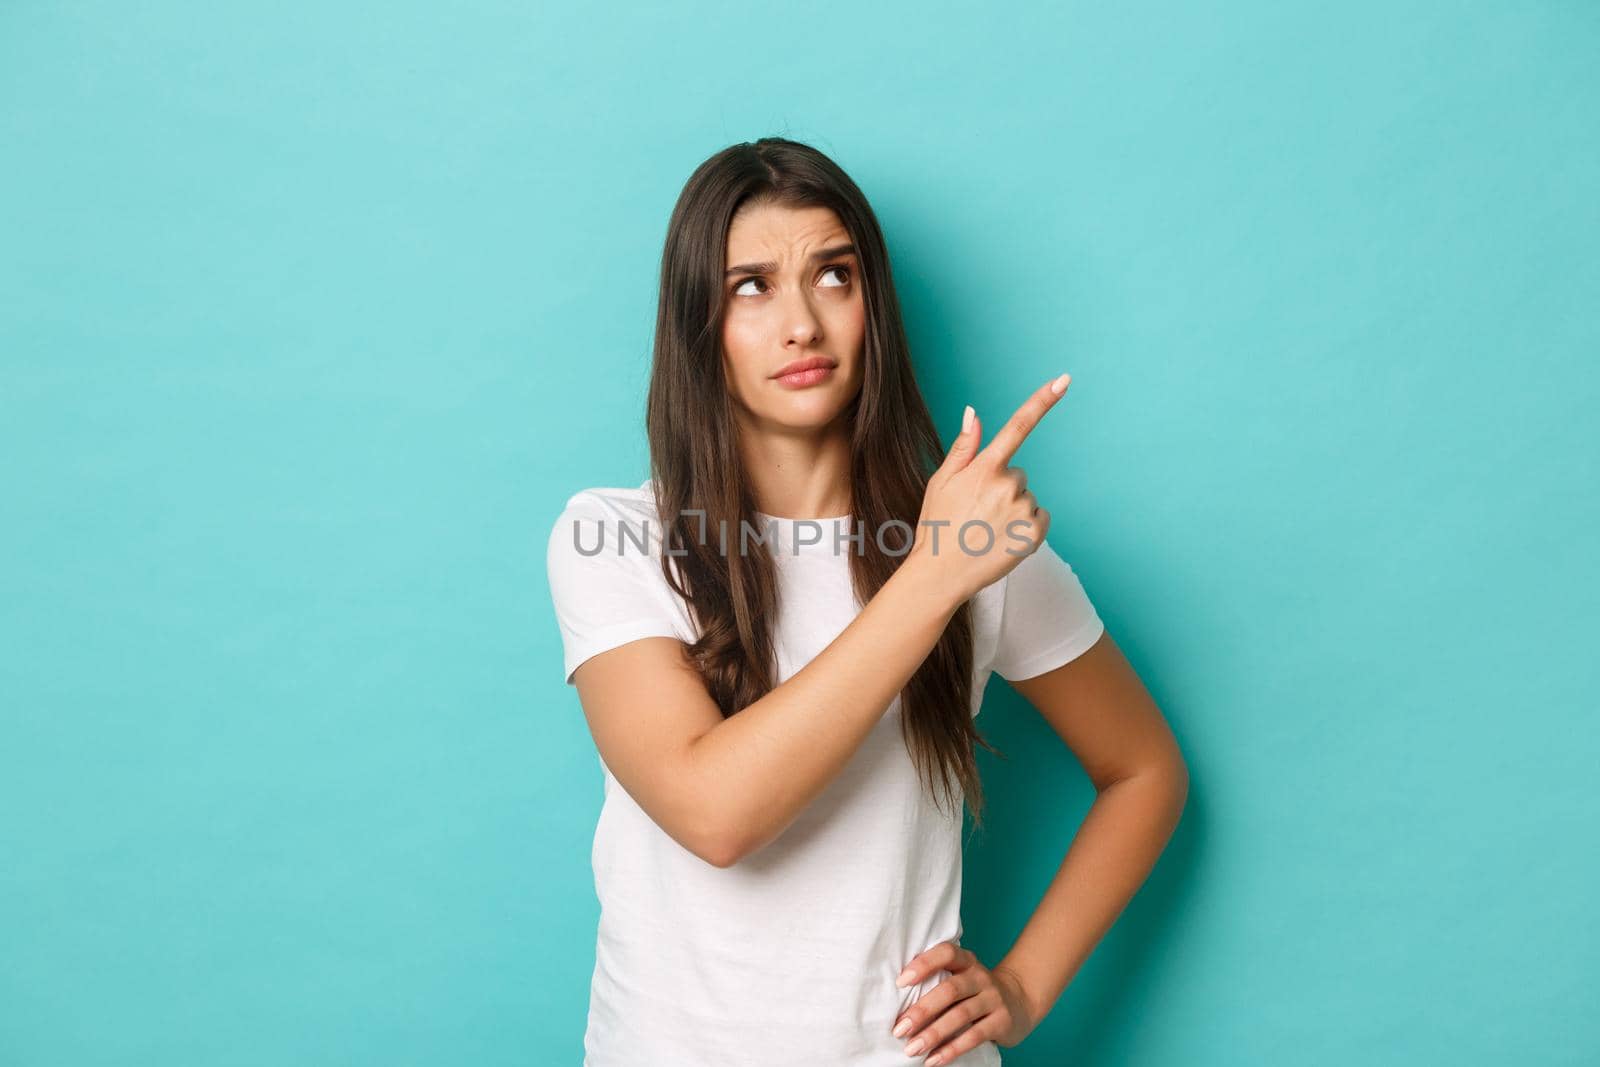 Image of doubtful brunette girl in white t-shirt, looking confused and something strange, pointing at upper right corner logo, standing over blue background.